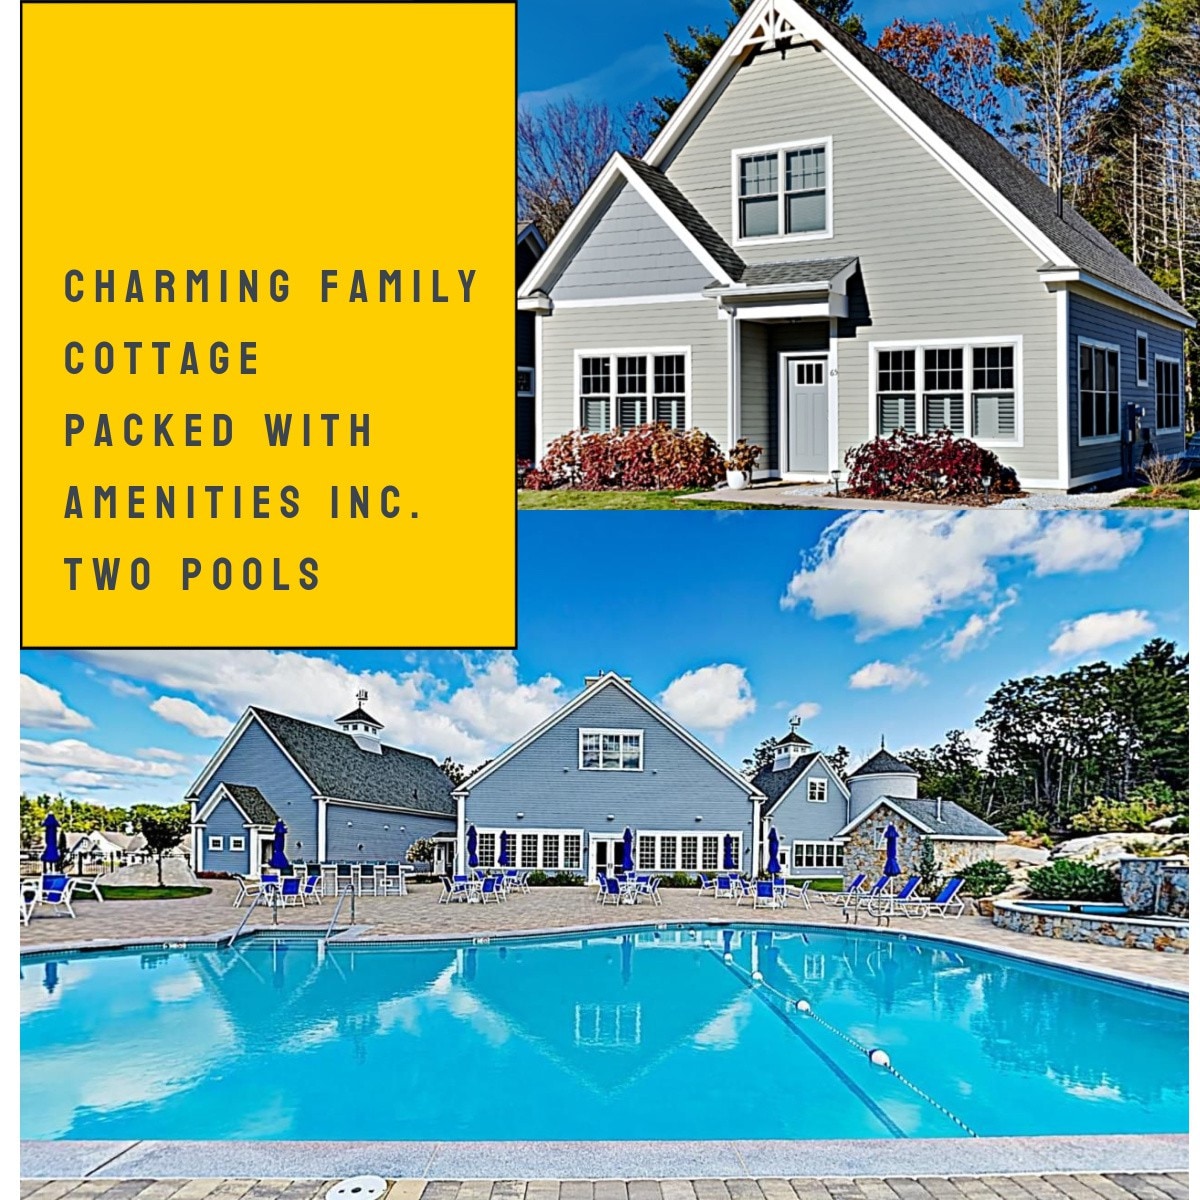 Experience The Magic Of Maine In 3 Br Cottage Loaded With Amenities Inc. Pool